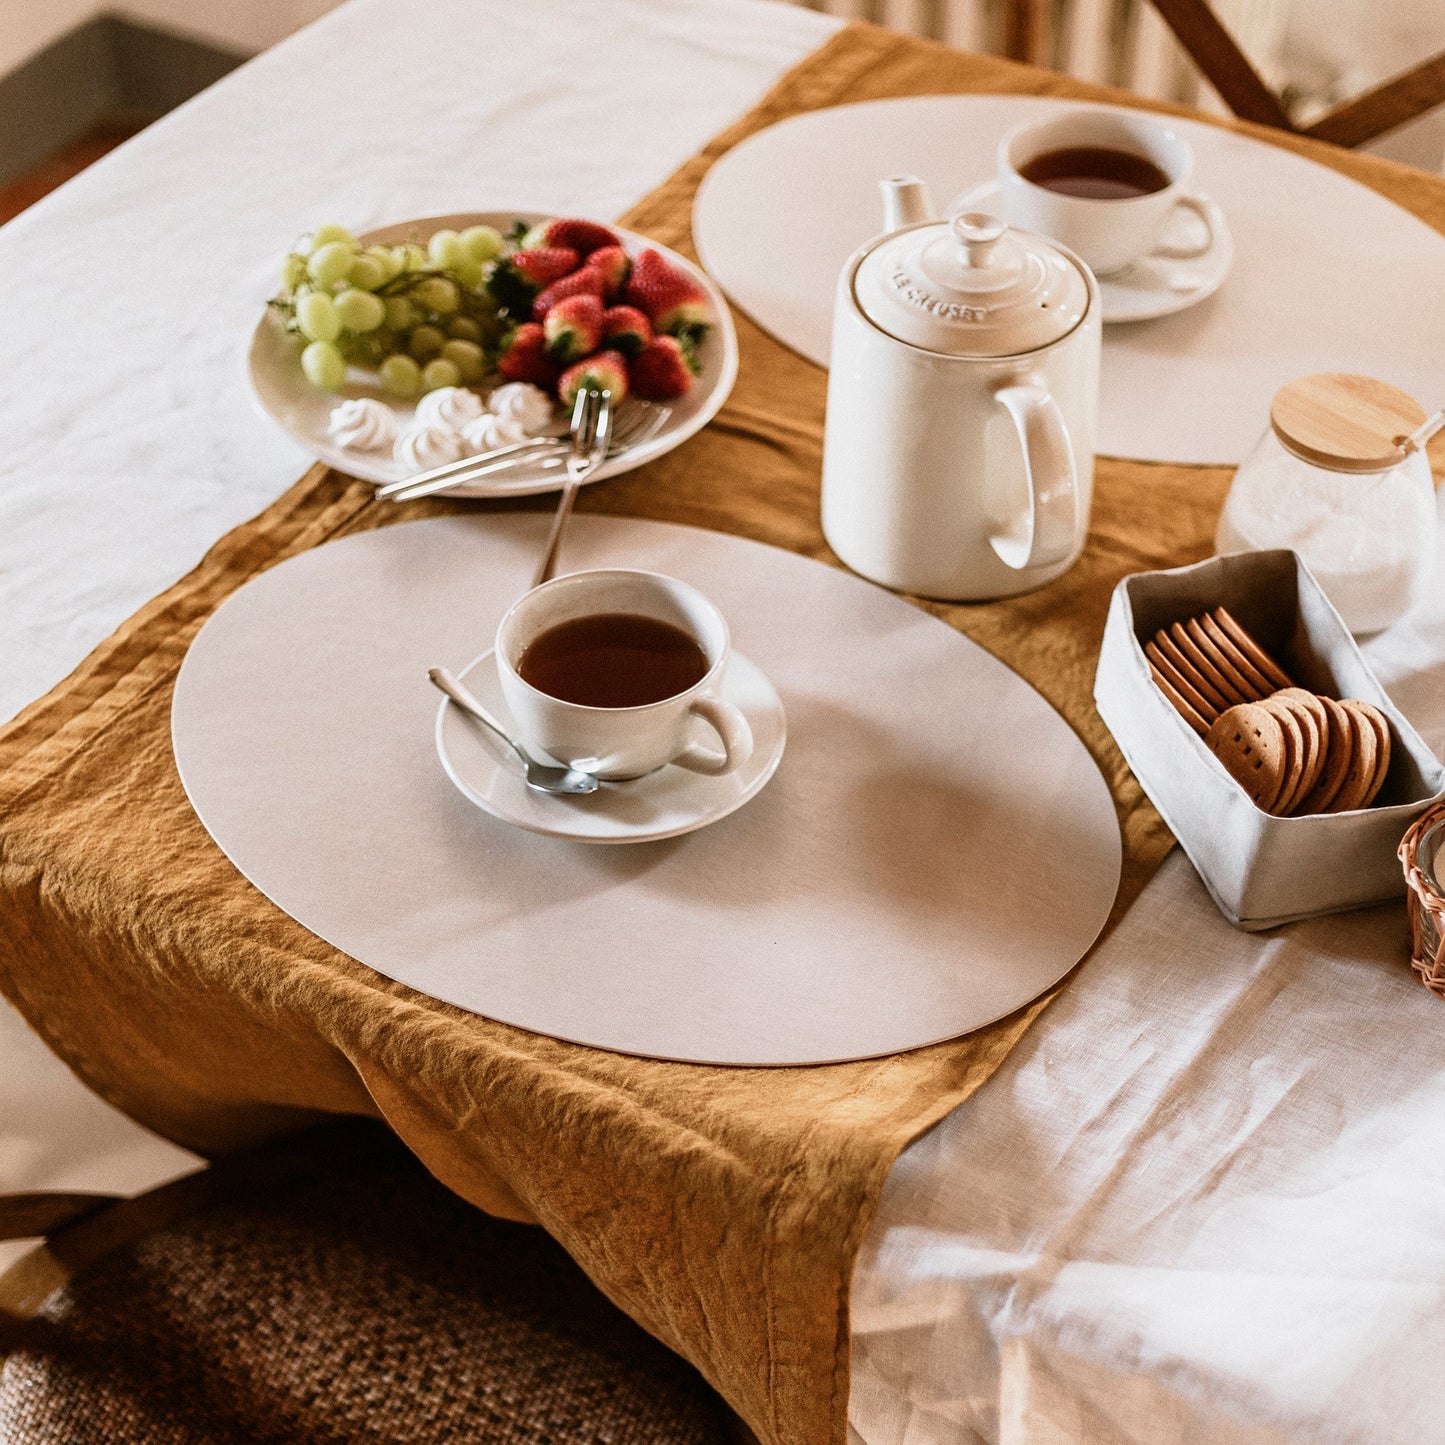 A beige oval washable paper placemat is shown atop a linen tablecloth-clad table. Atop it sits a cup of coffee, at left is a bowl of fruit, and at right is a washable paper basket holding biscuits.